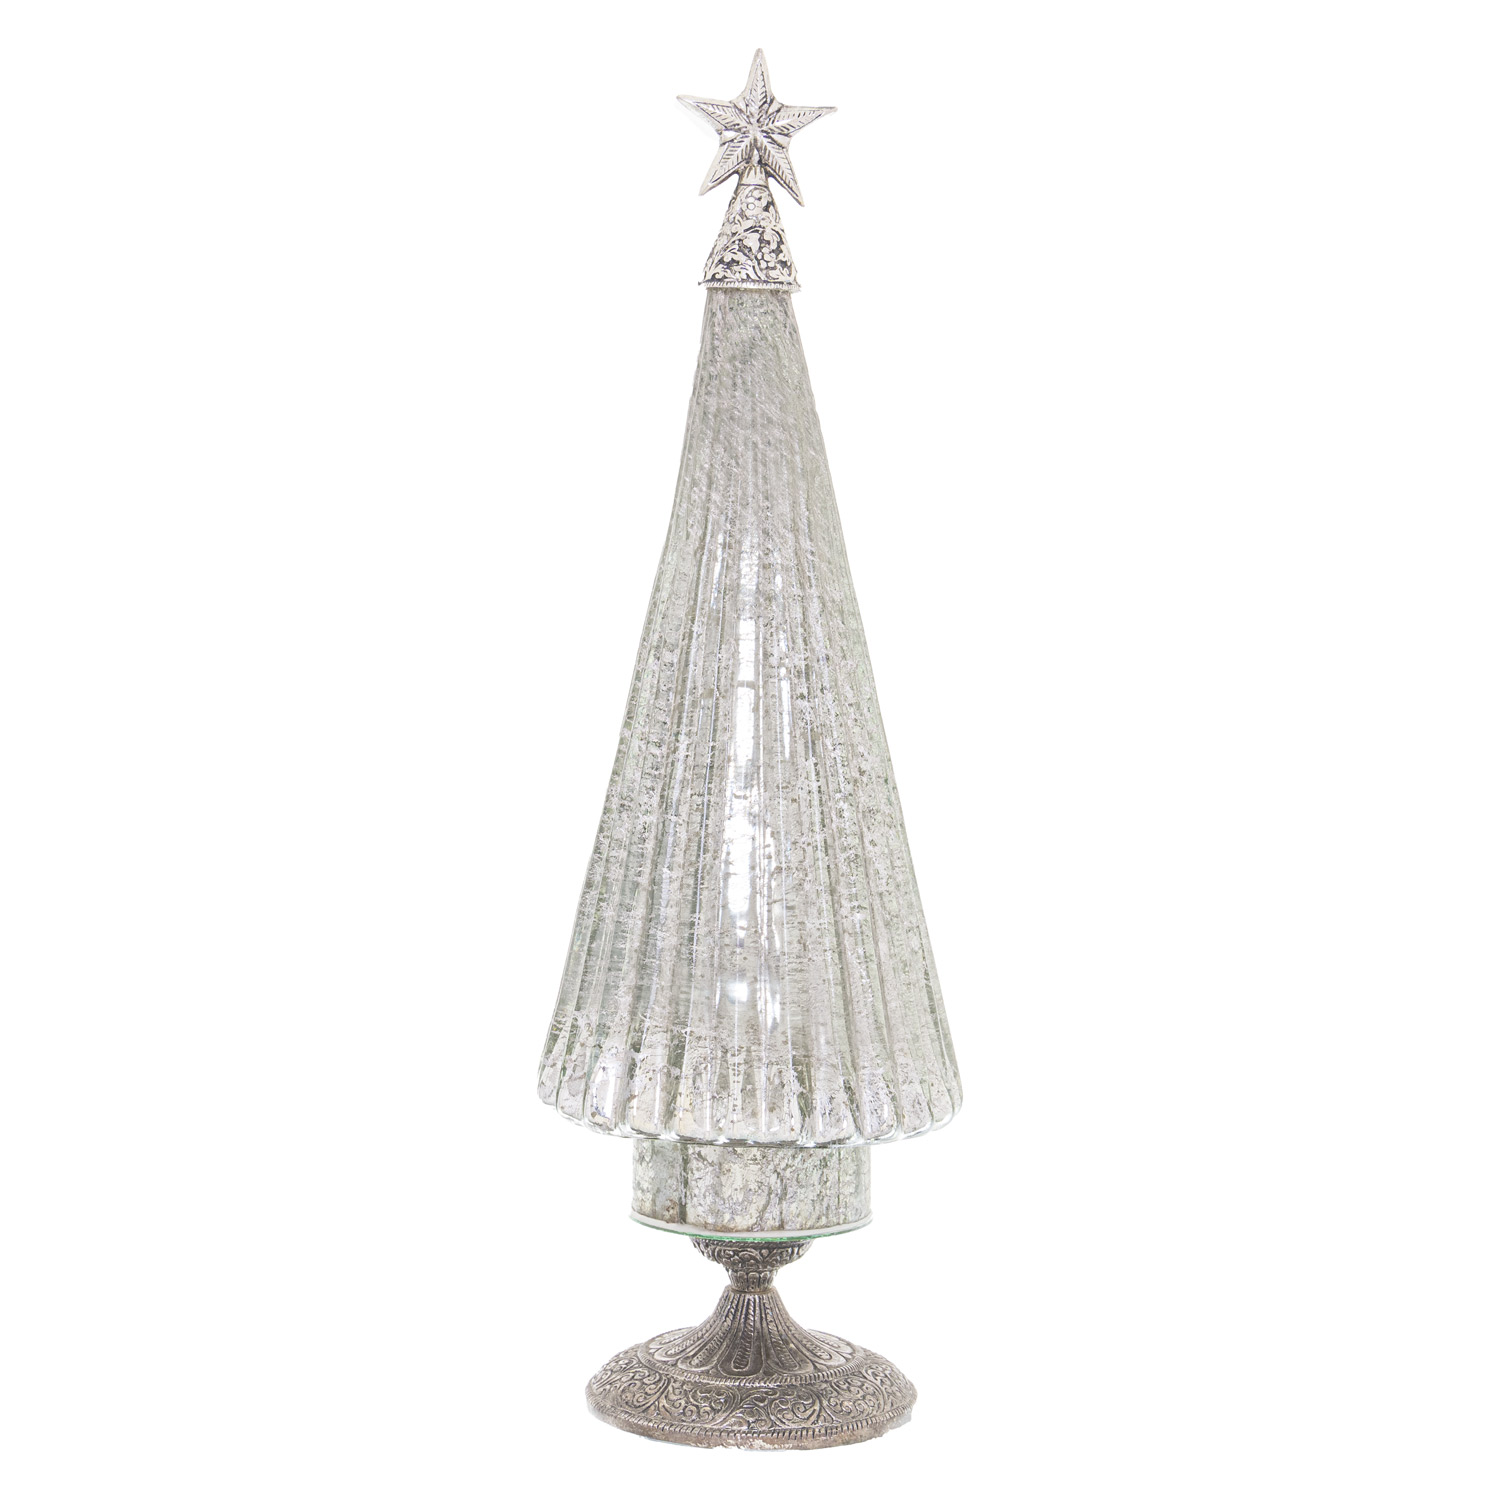 The Noel Collection Footed Glass Decorative Tree - Image 1